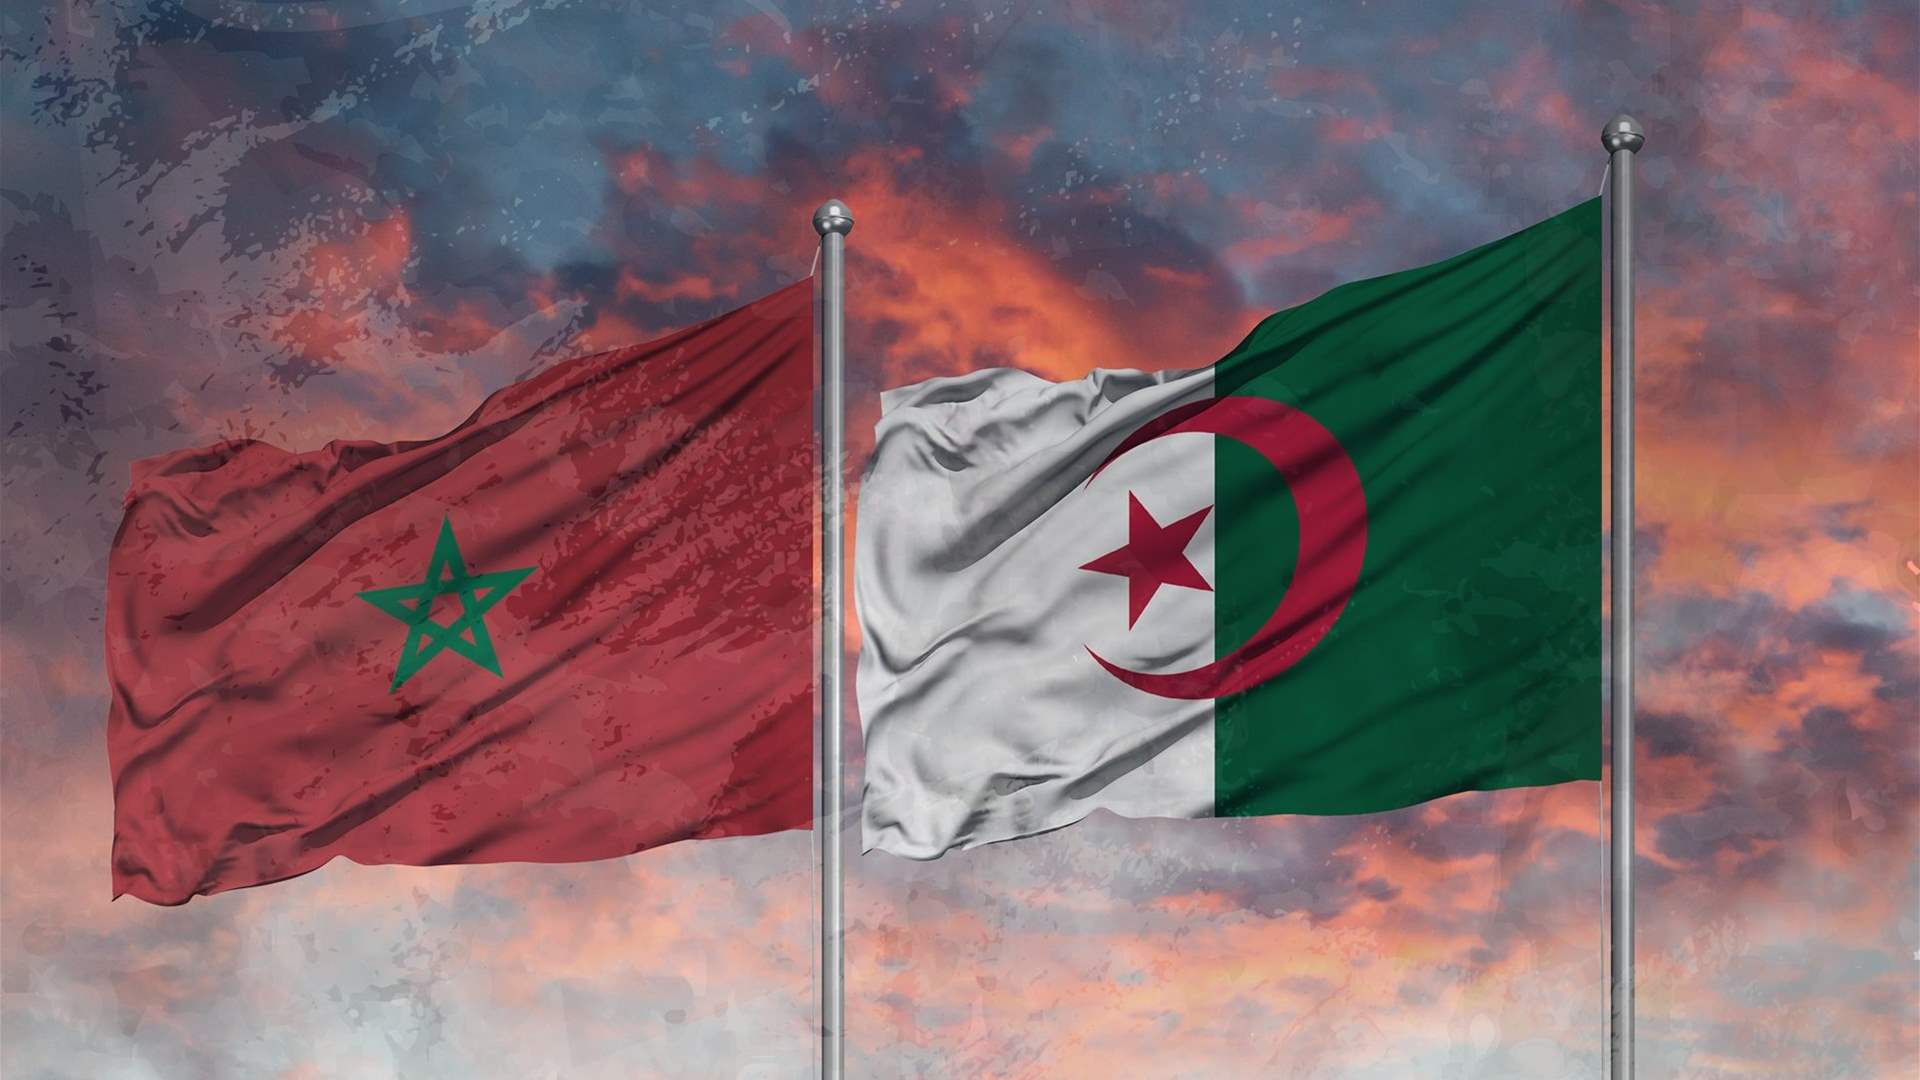 The Moroccan monarch hopes to &quot;get things back to normal&quot; with Algeria